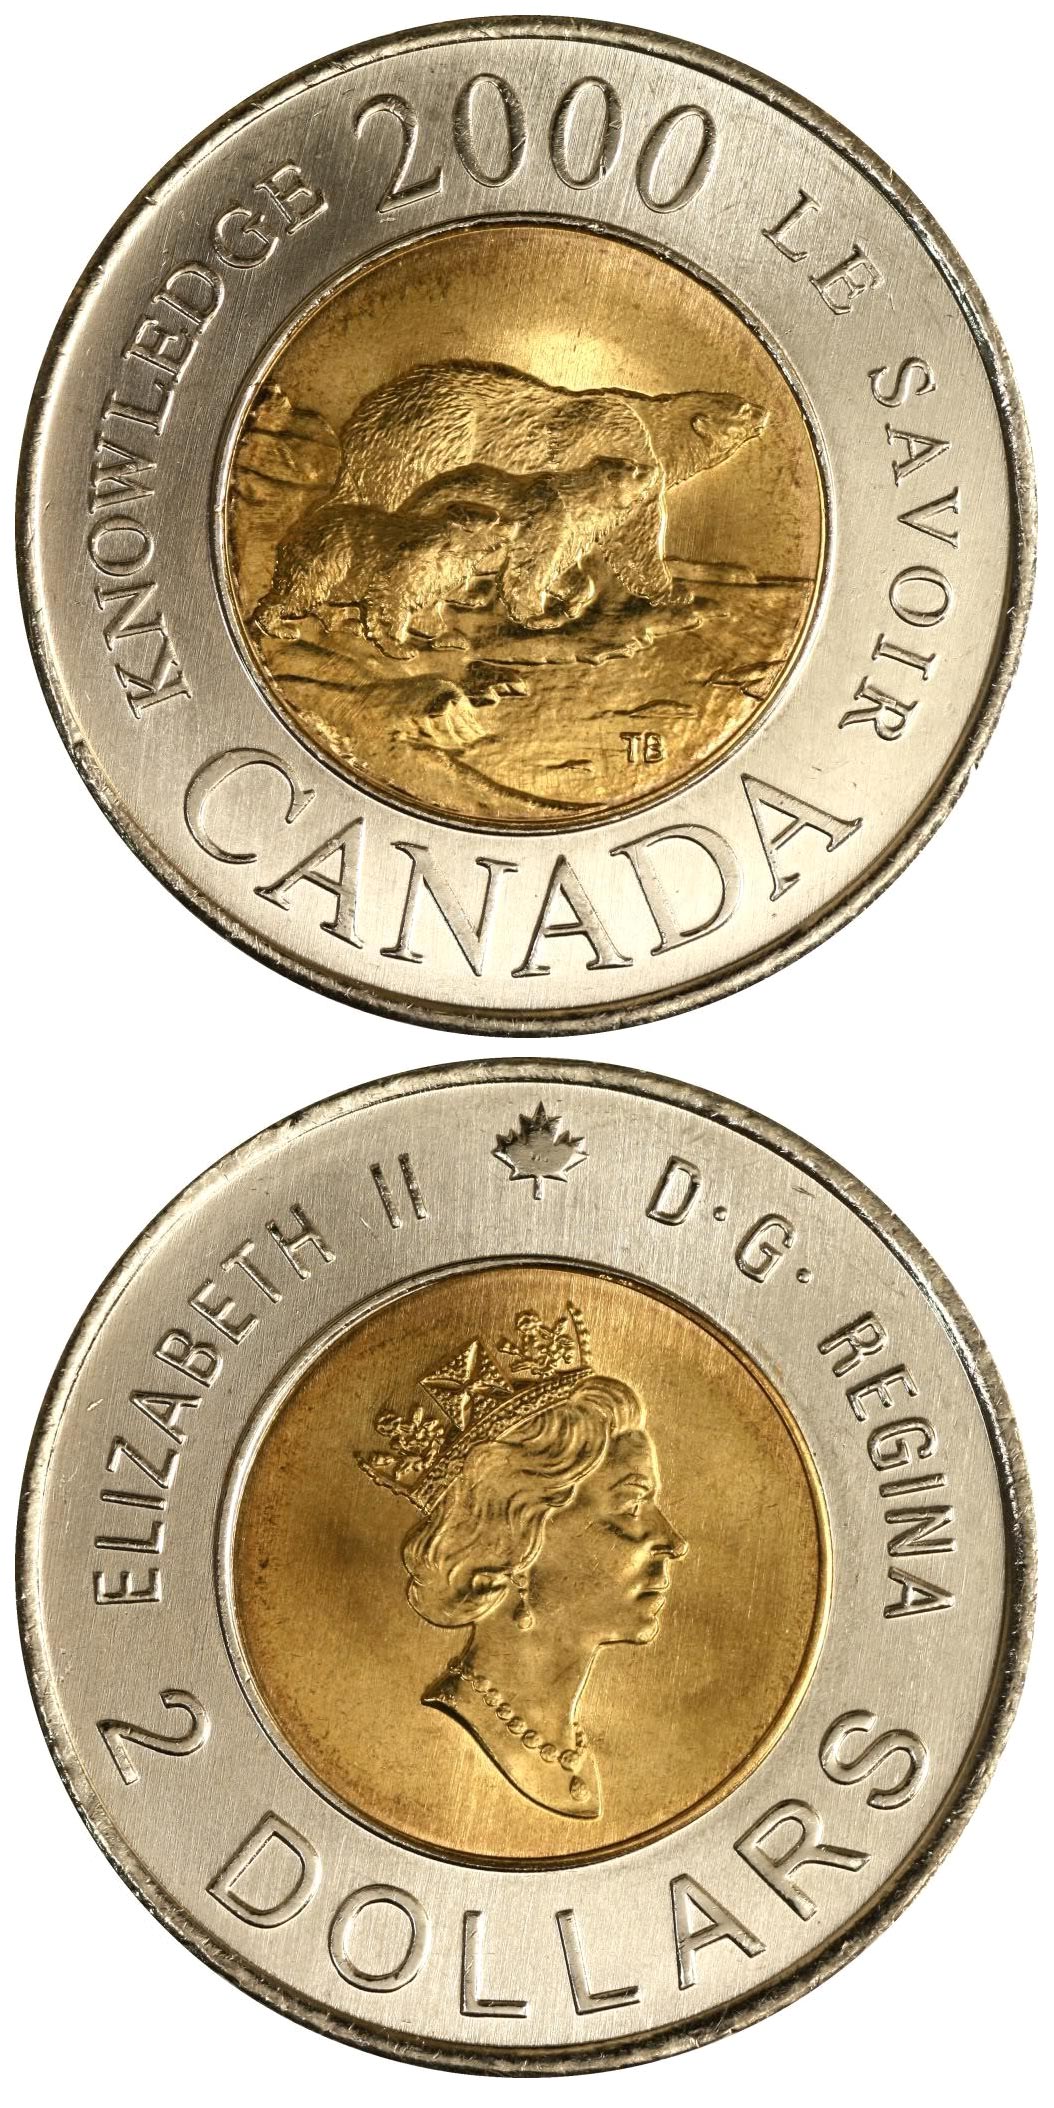 Image of 2 dollars coin - Path of Knowledge | Canada 2000.  The Bimetal: CuNi, nordic gold coin is of UNC quality.